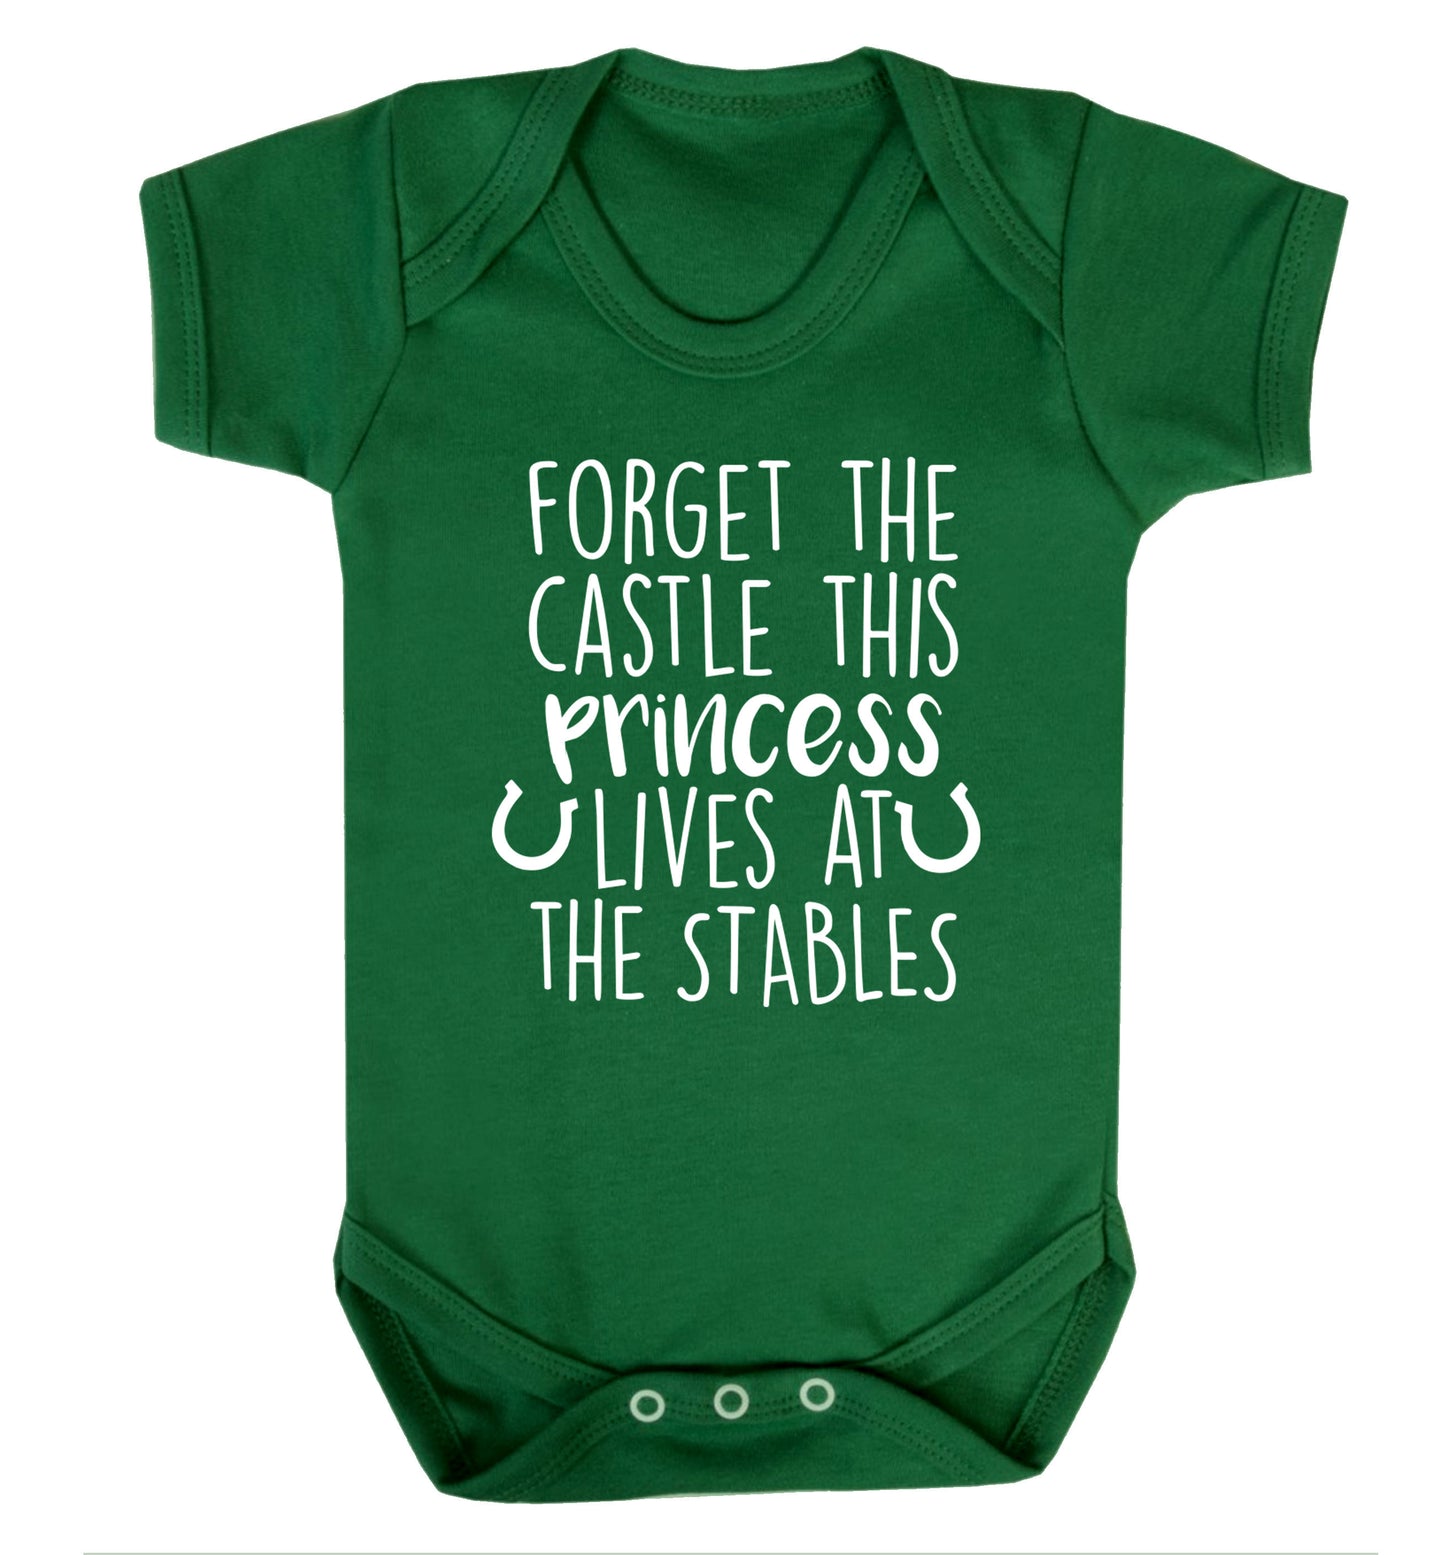 Forget the castle this princess lives at the stables Baby Vest green 18-24 months